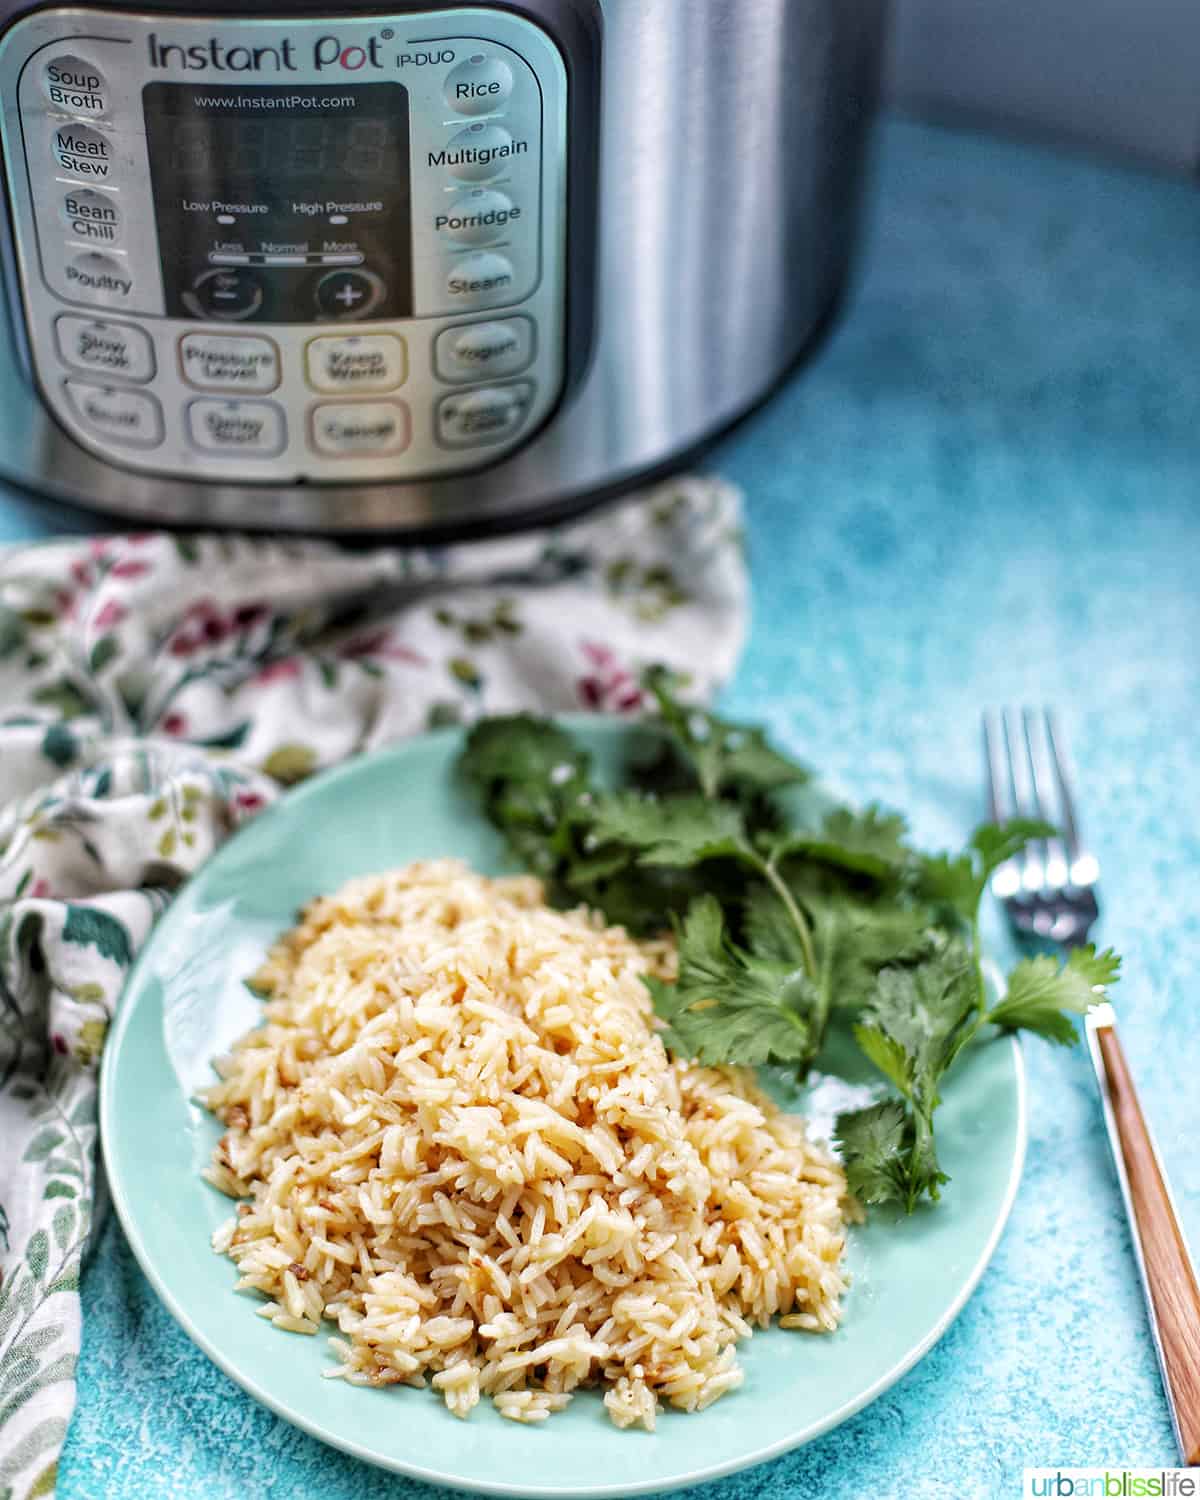 instant pot with plate of garlic rice and herbs, a fork, colorful napkin, on a bright blue table.